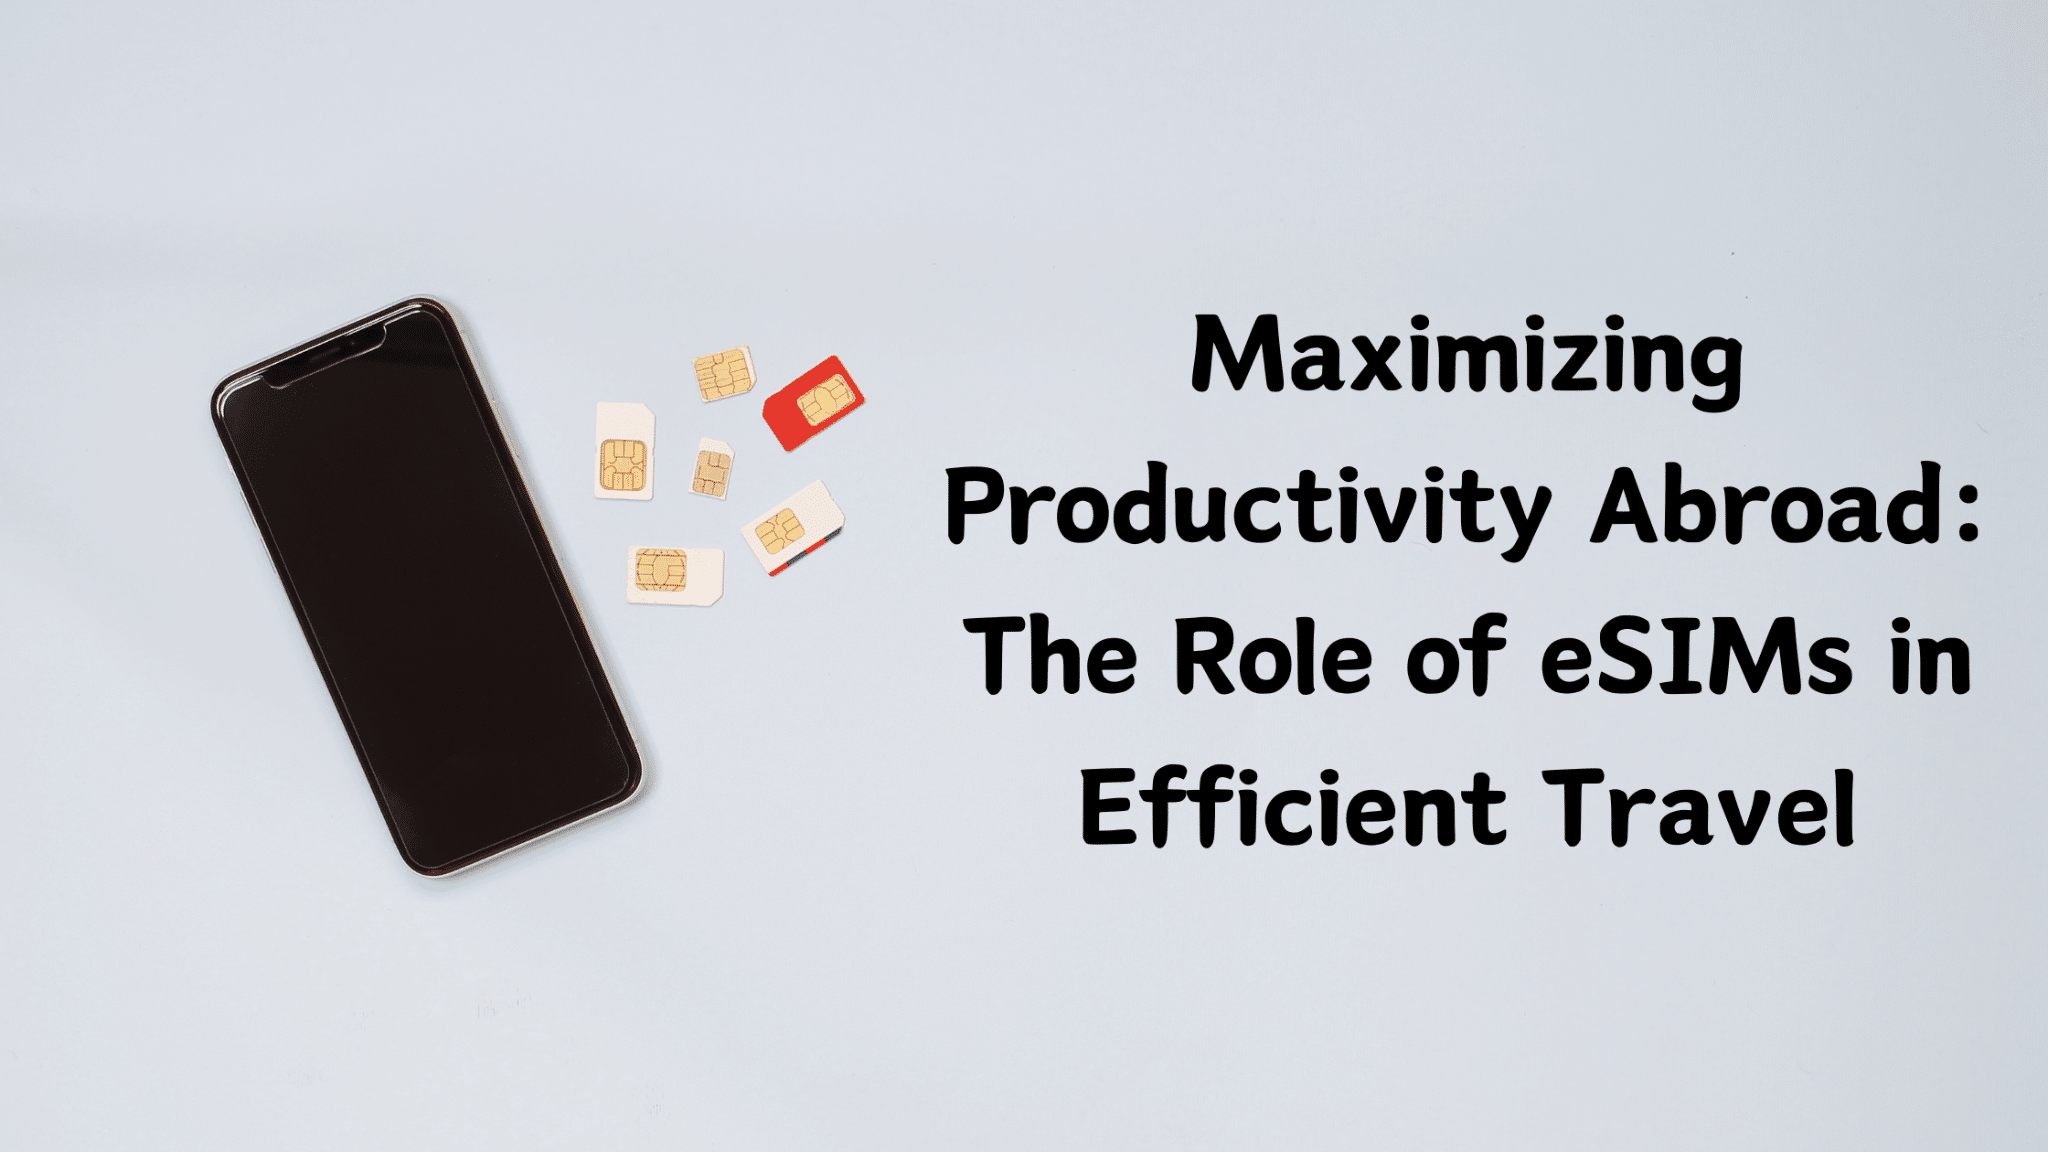 Maximizing Productivity Abroad: The Role of eSIMs in Efficient Travel